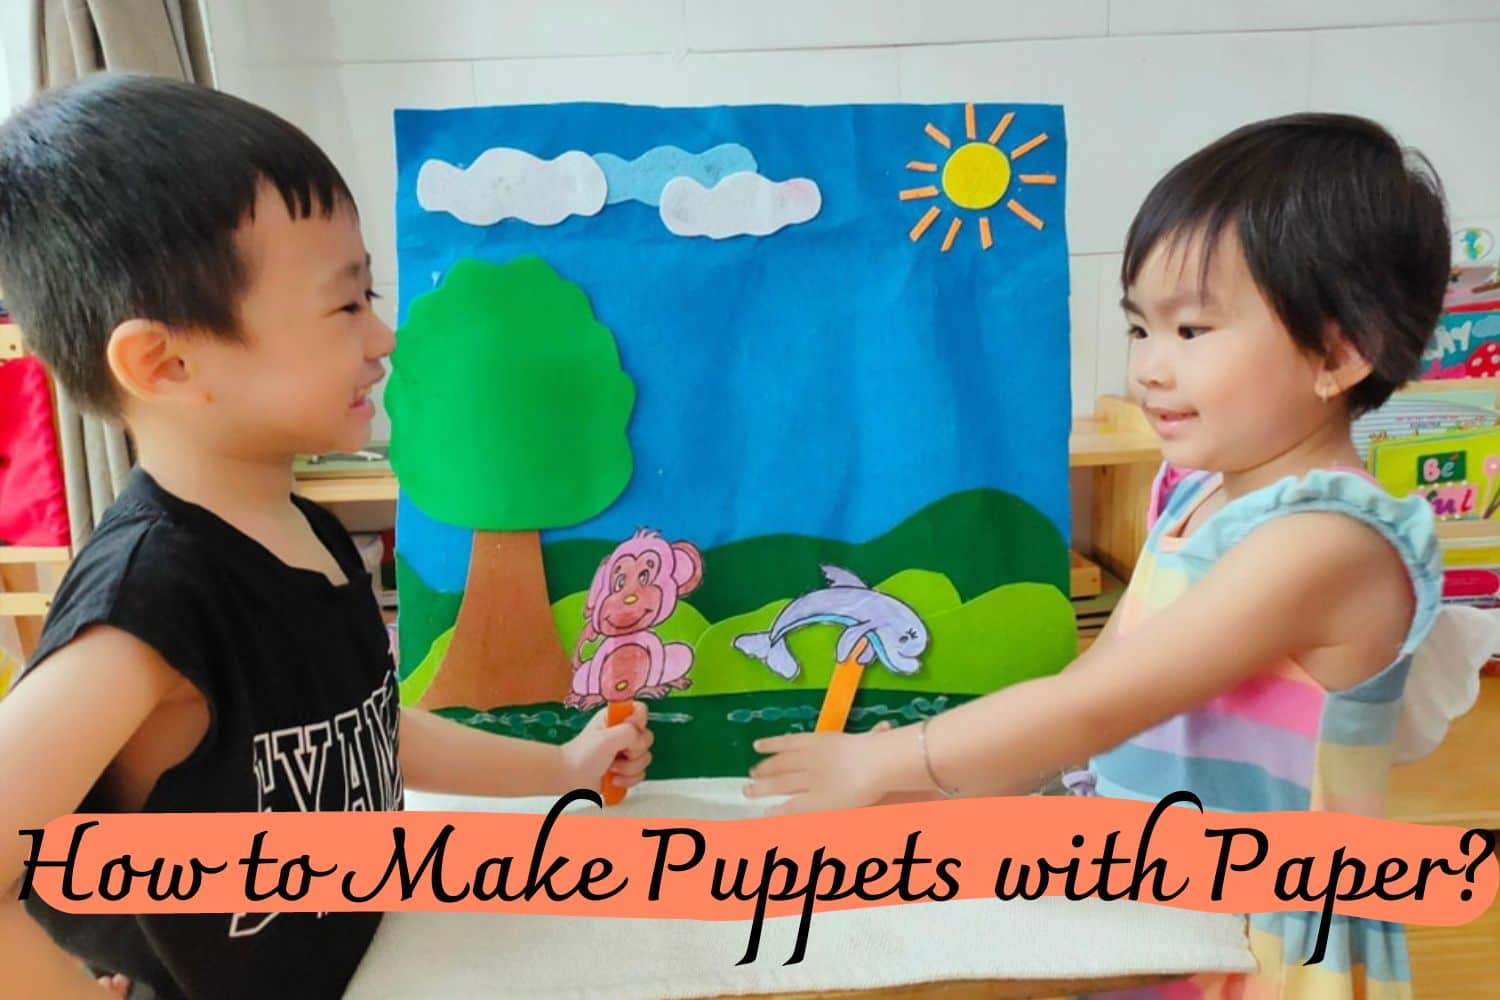 How to Make Puppets with Paper